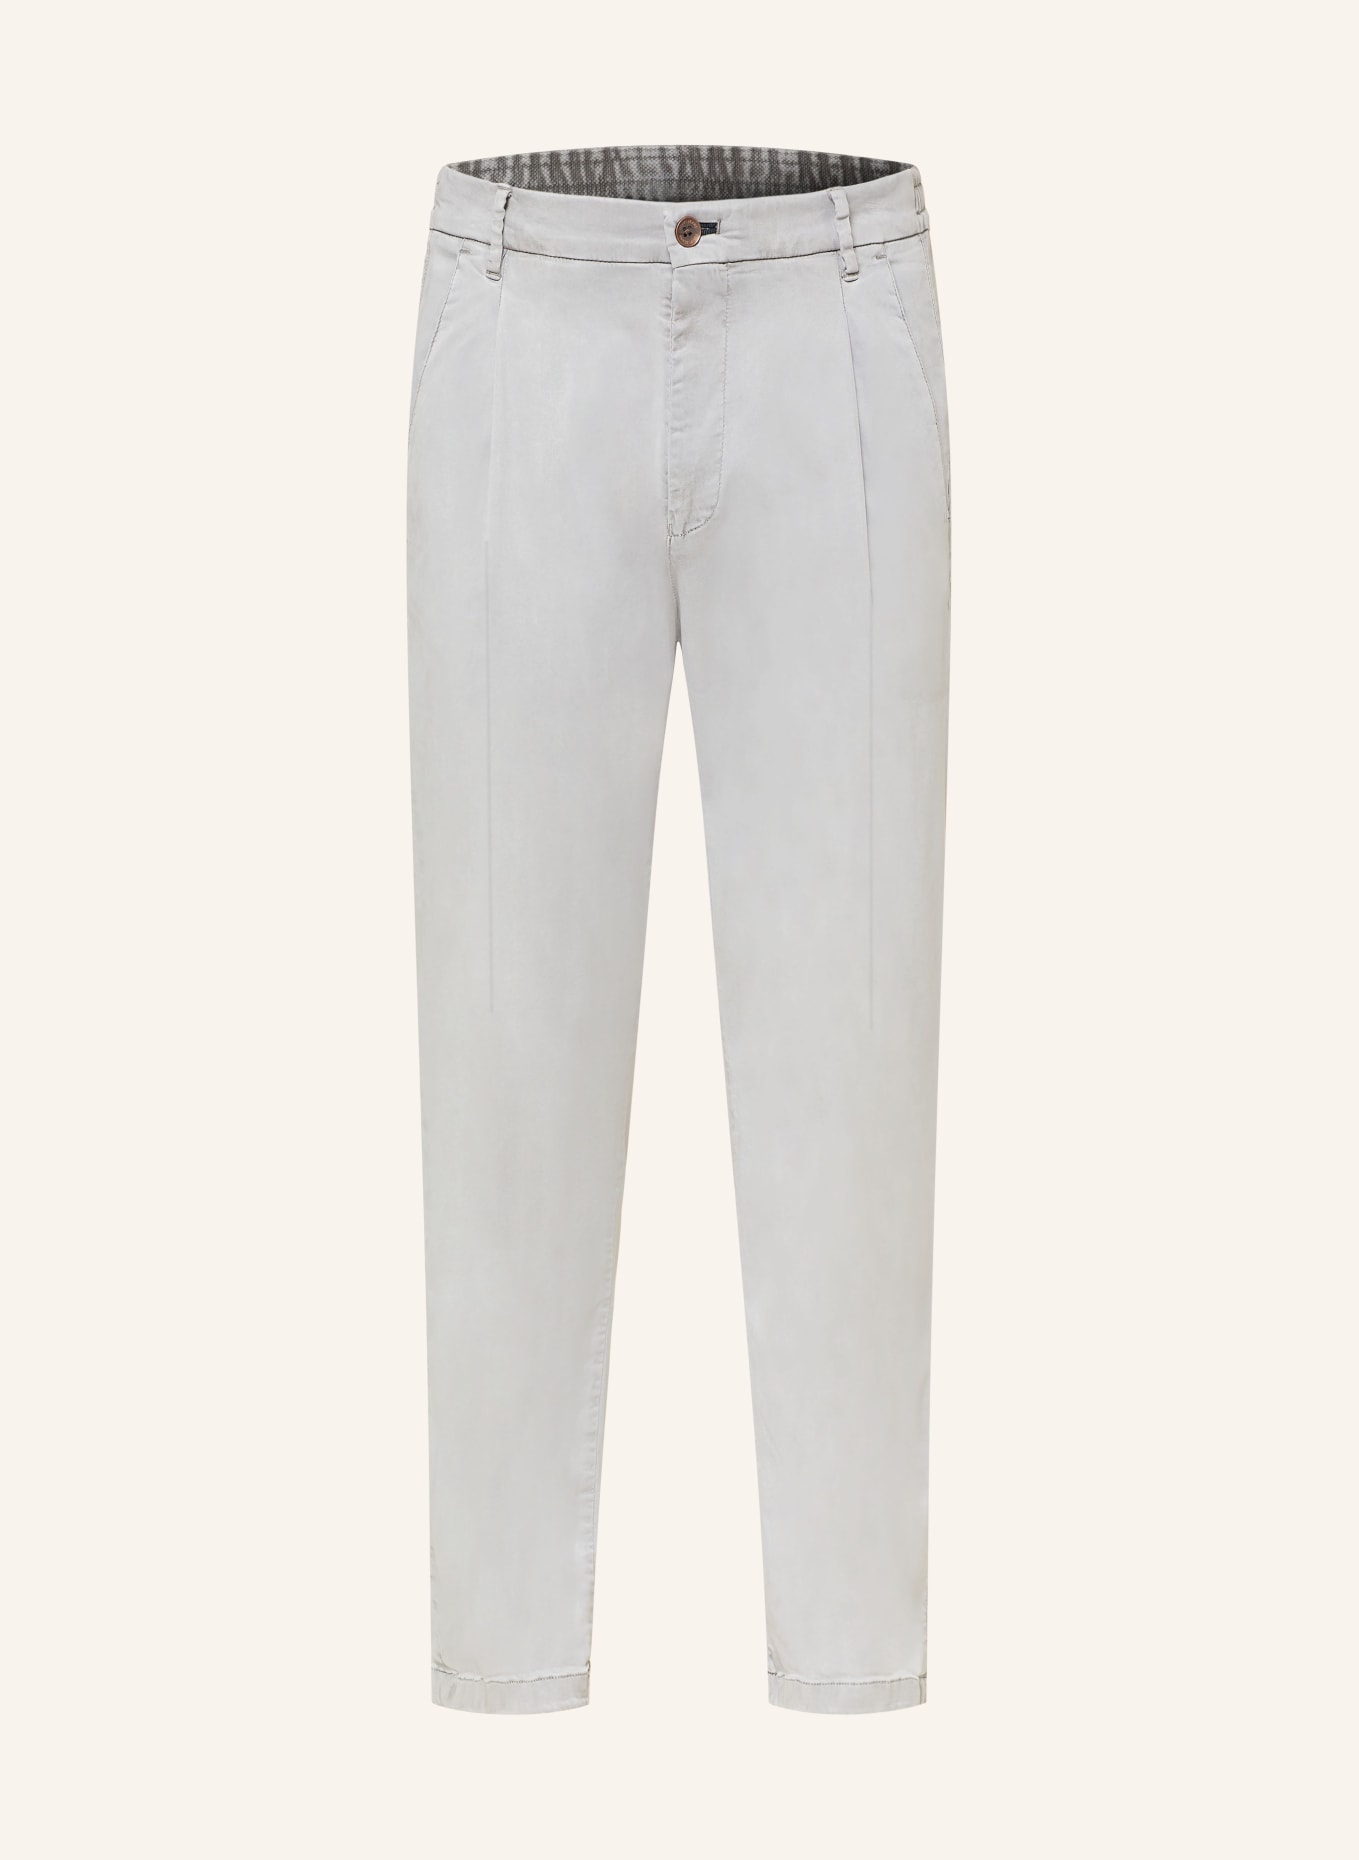 JOOP! JEANS Chinos regular fit, Color: GRAY (Image 1)